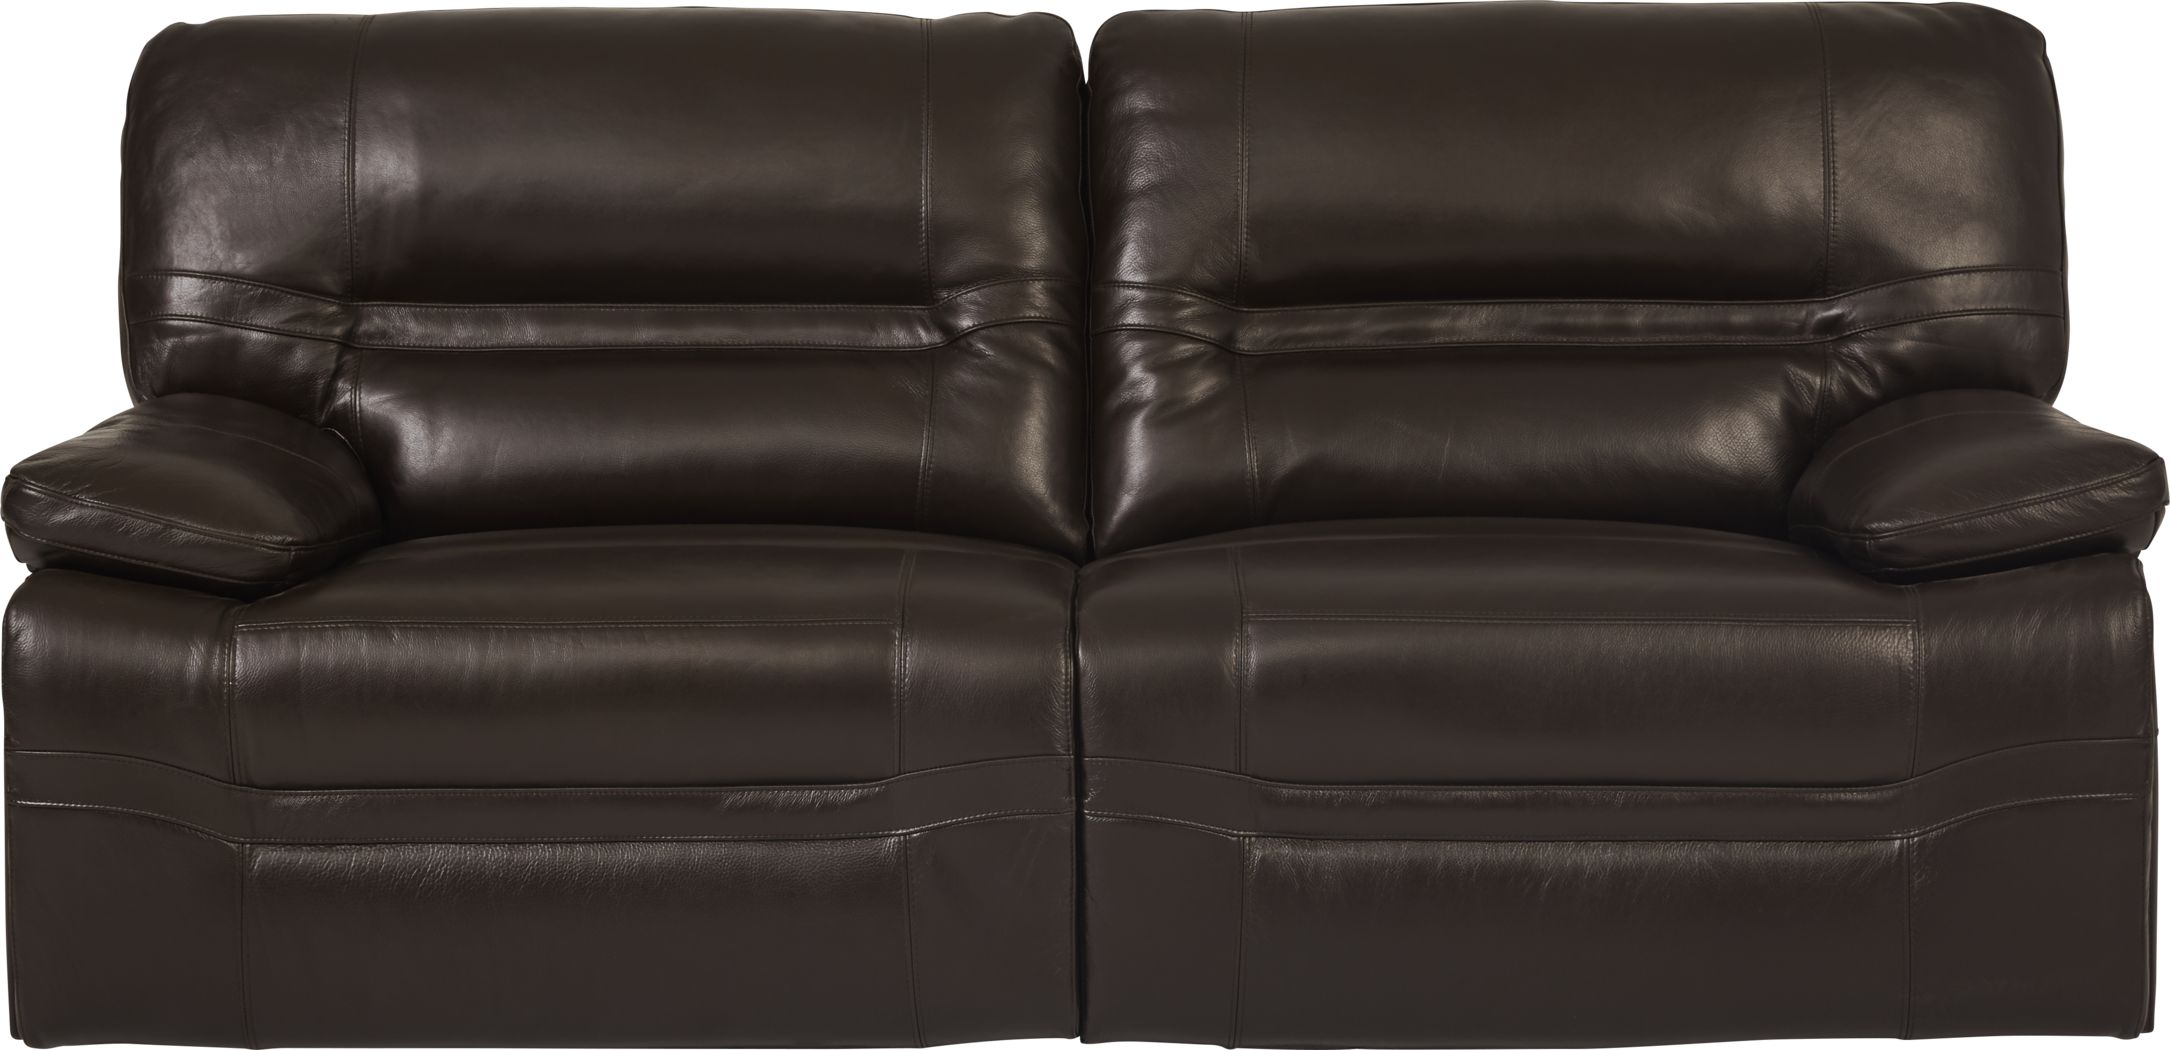 vernazza reclining leather sofa